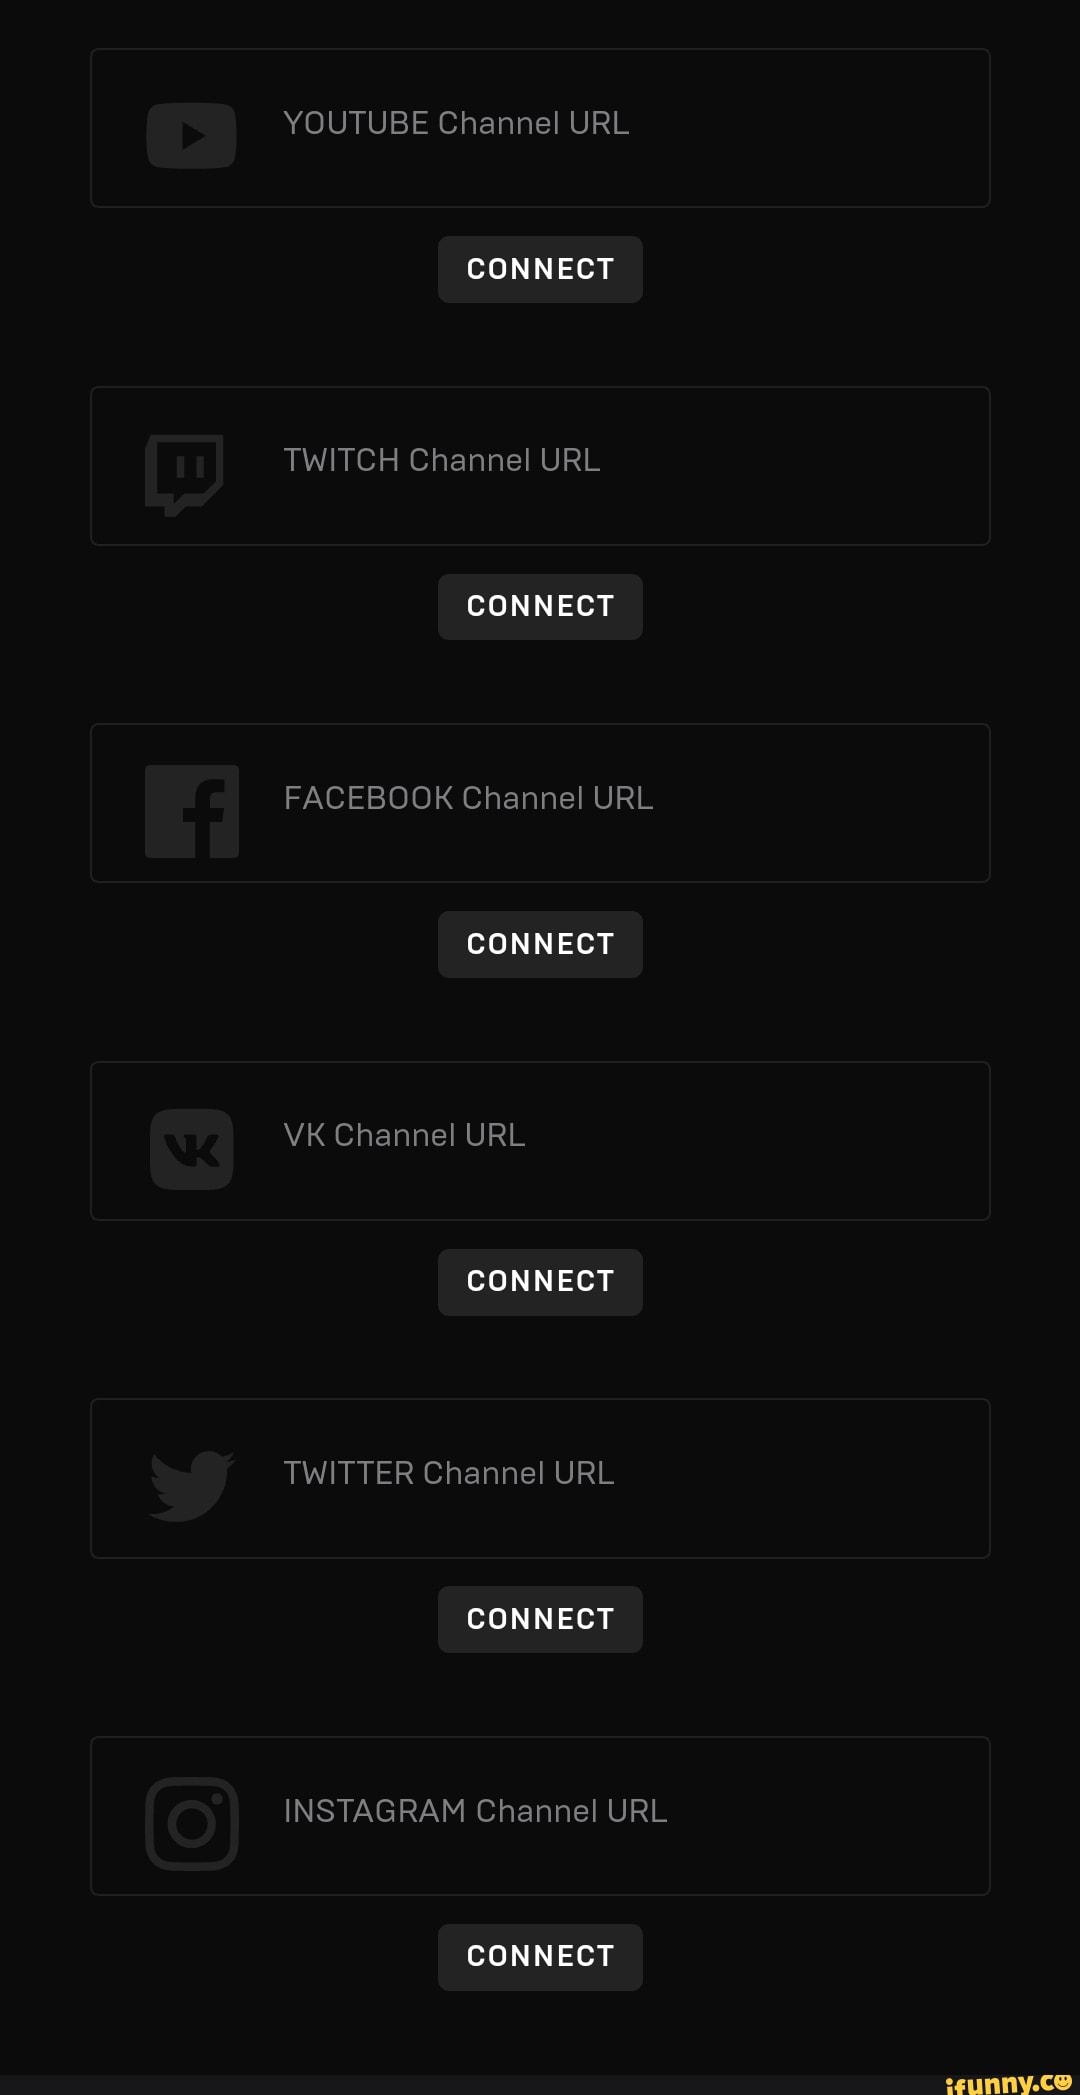 Youtube Channel Url Connect Twitch Channel Url Connect Facebook Channel Url Connect Vk Channel Url Connect Twitter Channel Url Connect Instagram Channel Url Connect